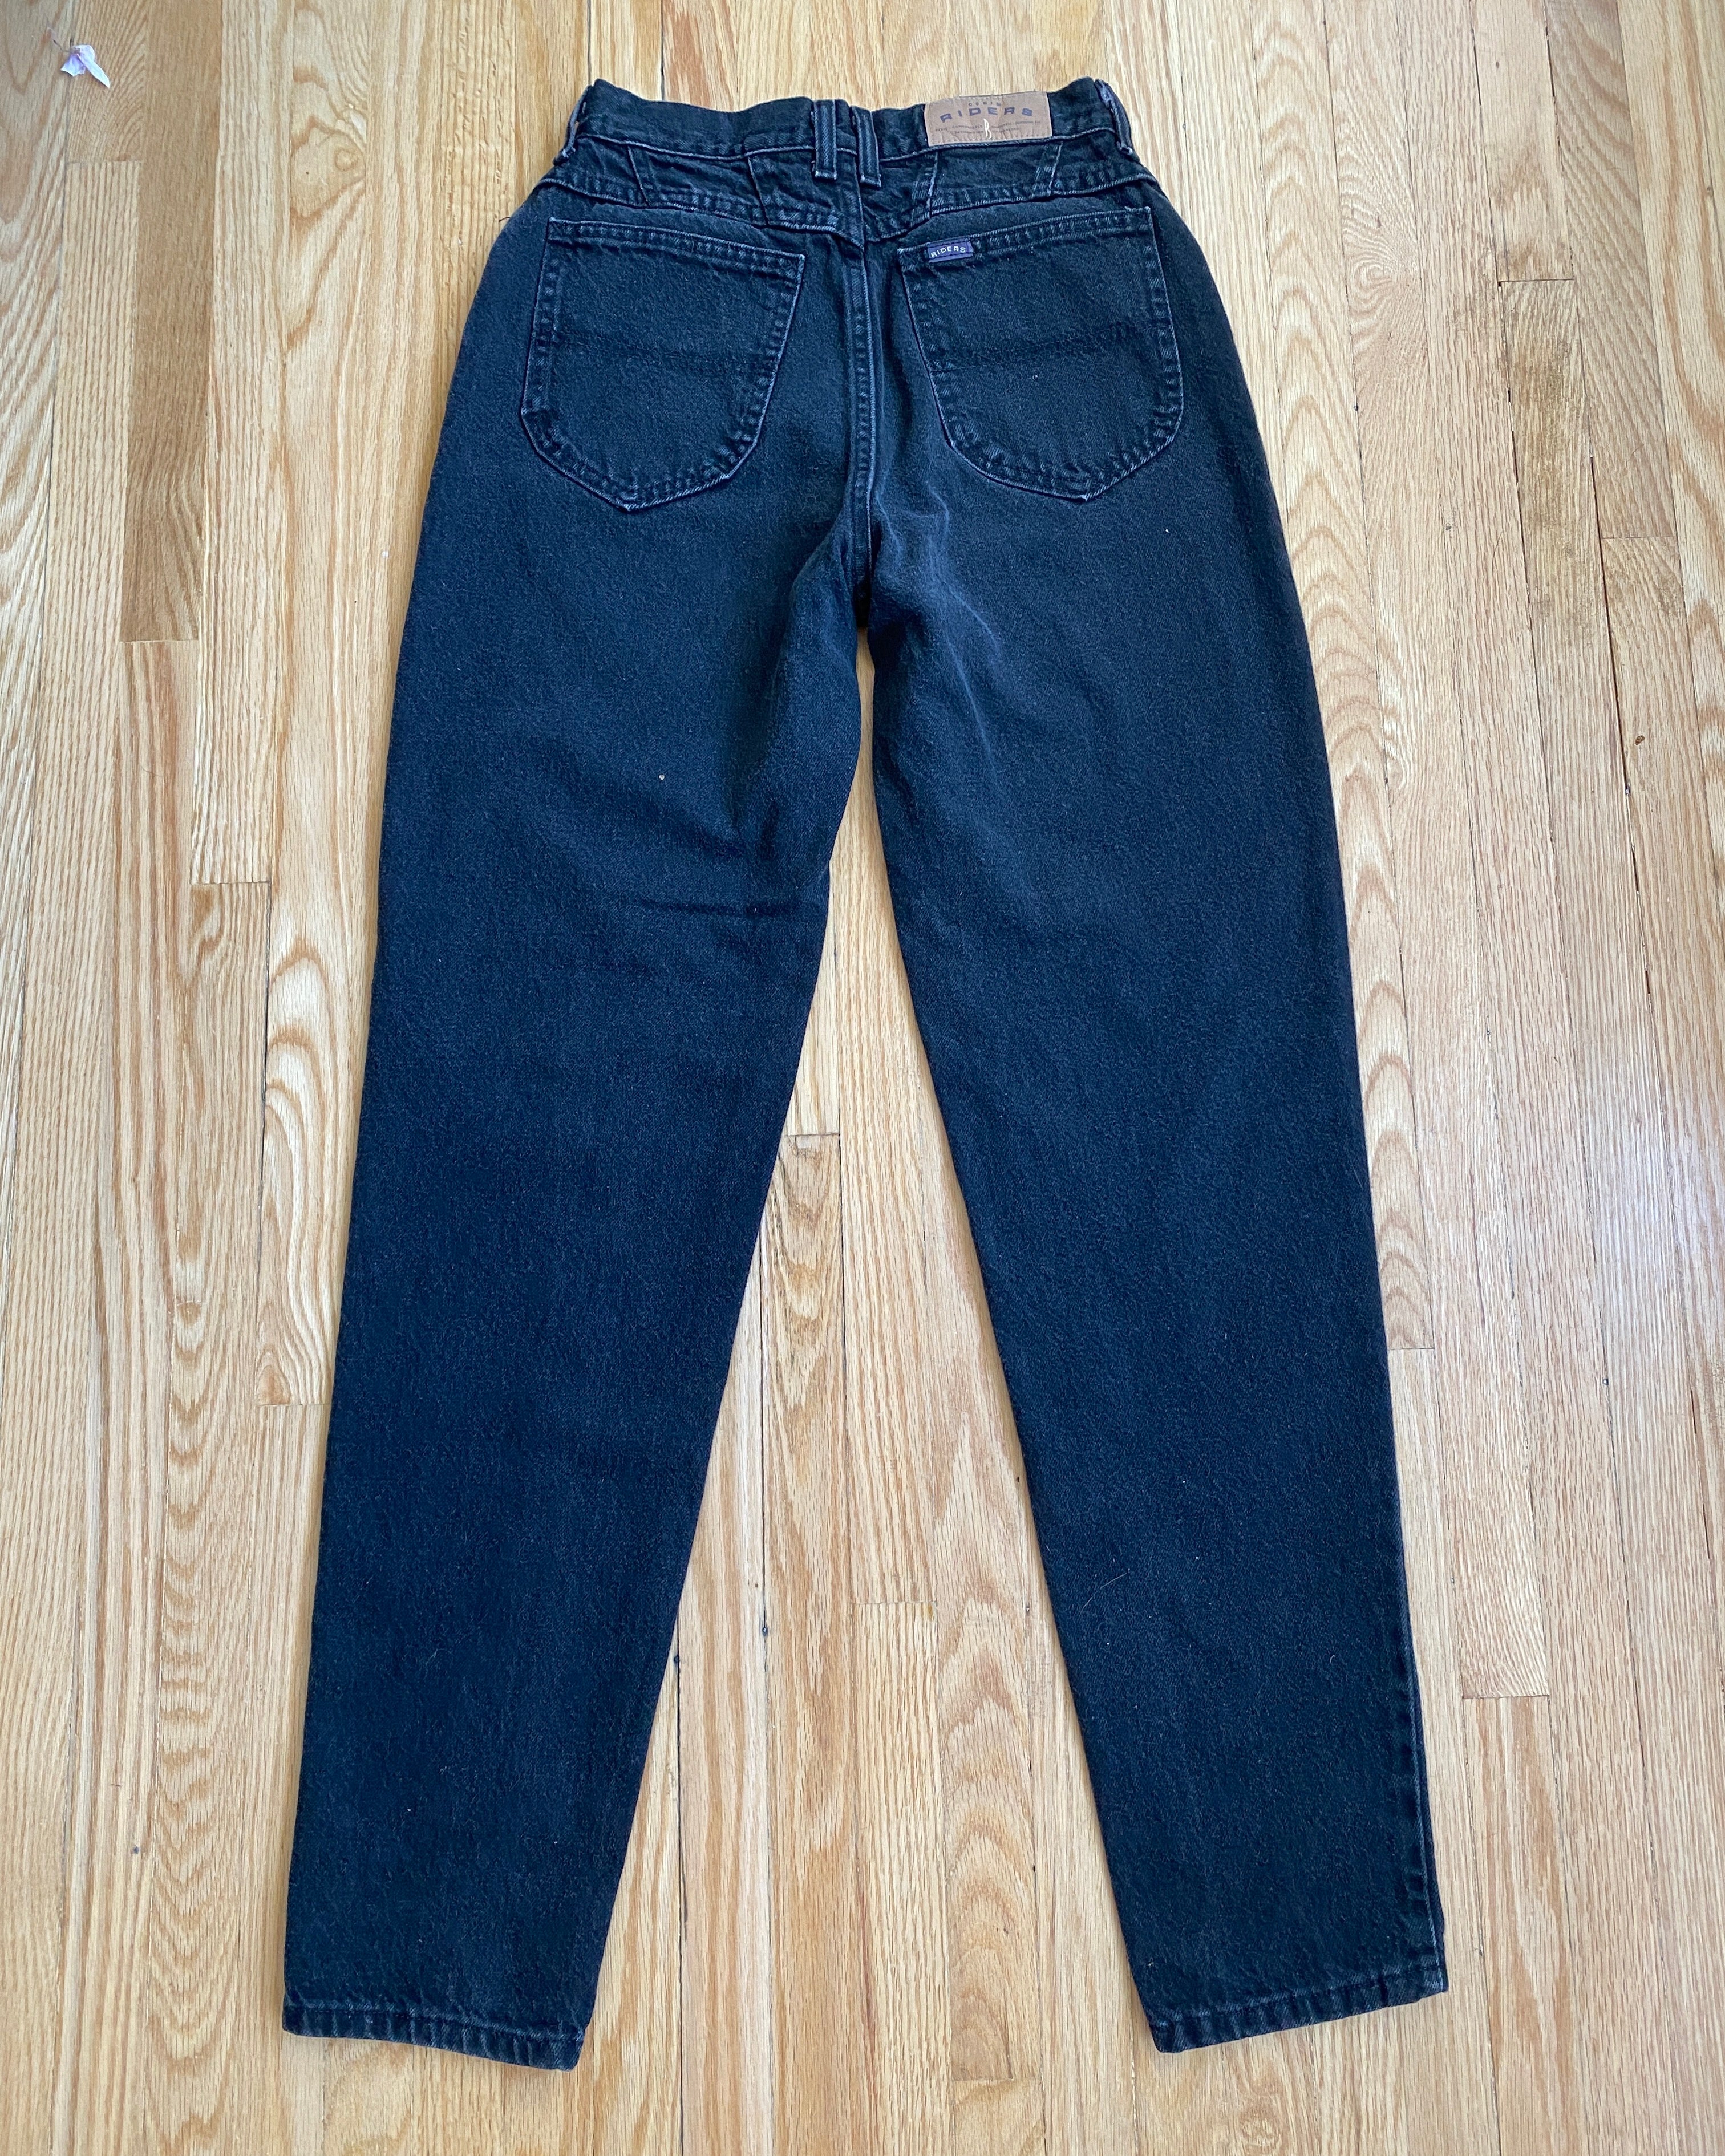 Vintage Riders Black Wash Jeans size 28 Made in USA